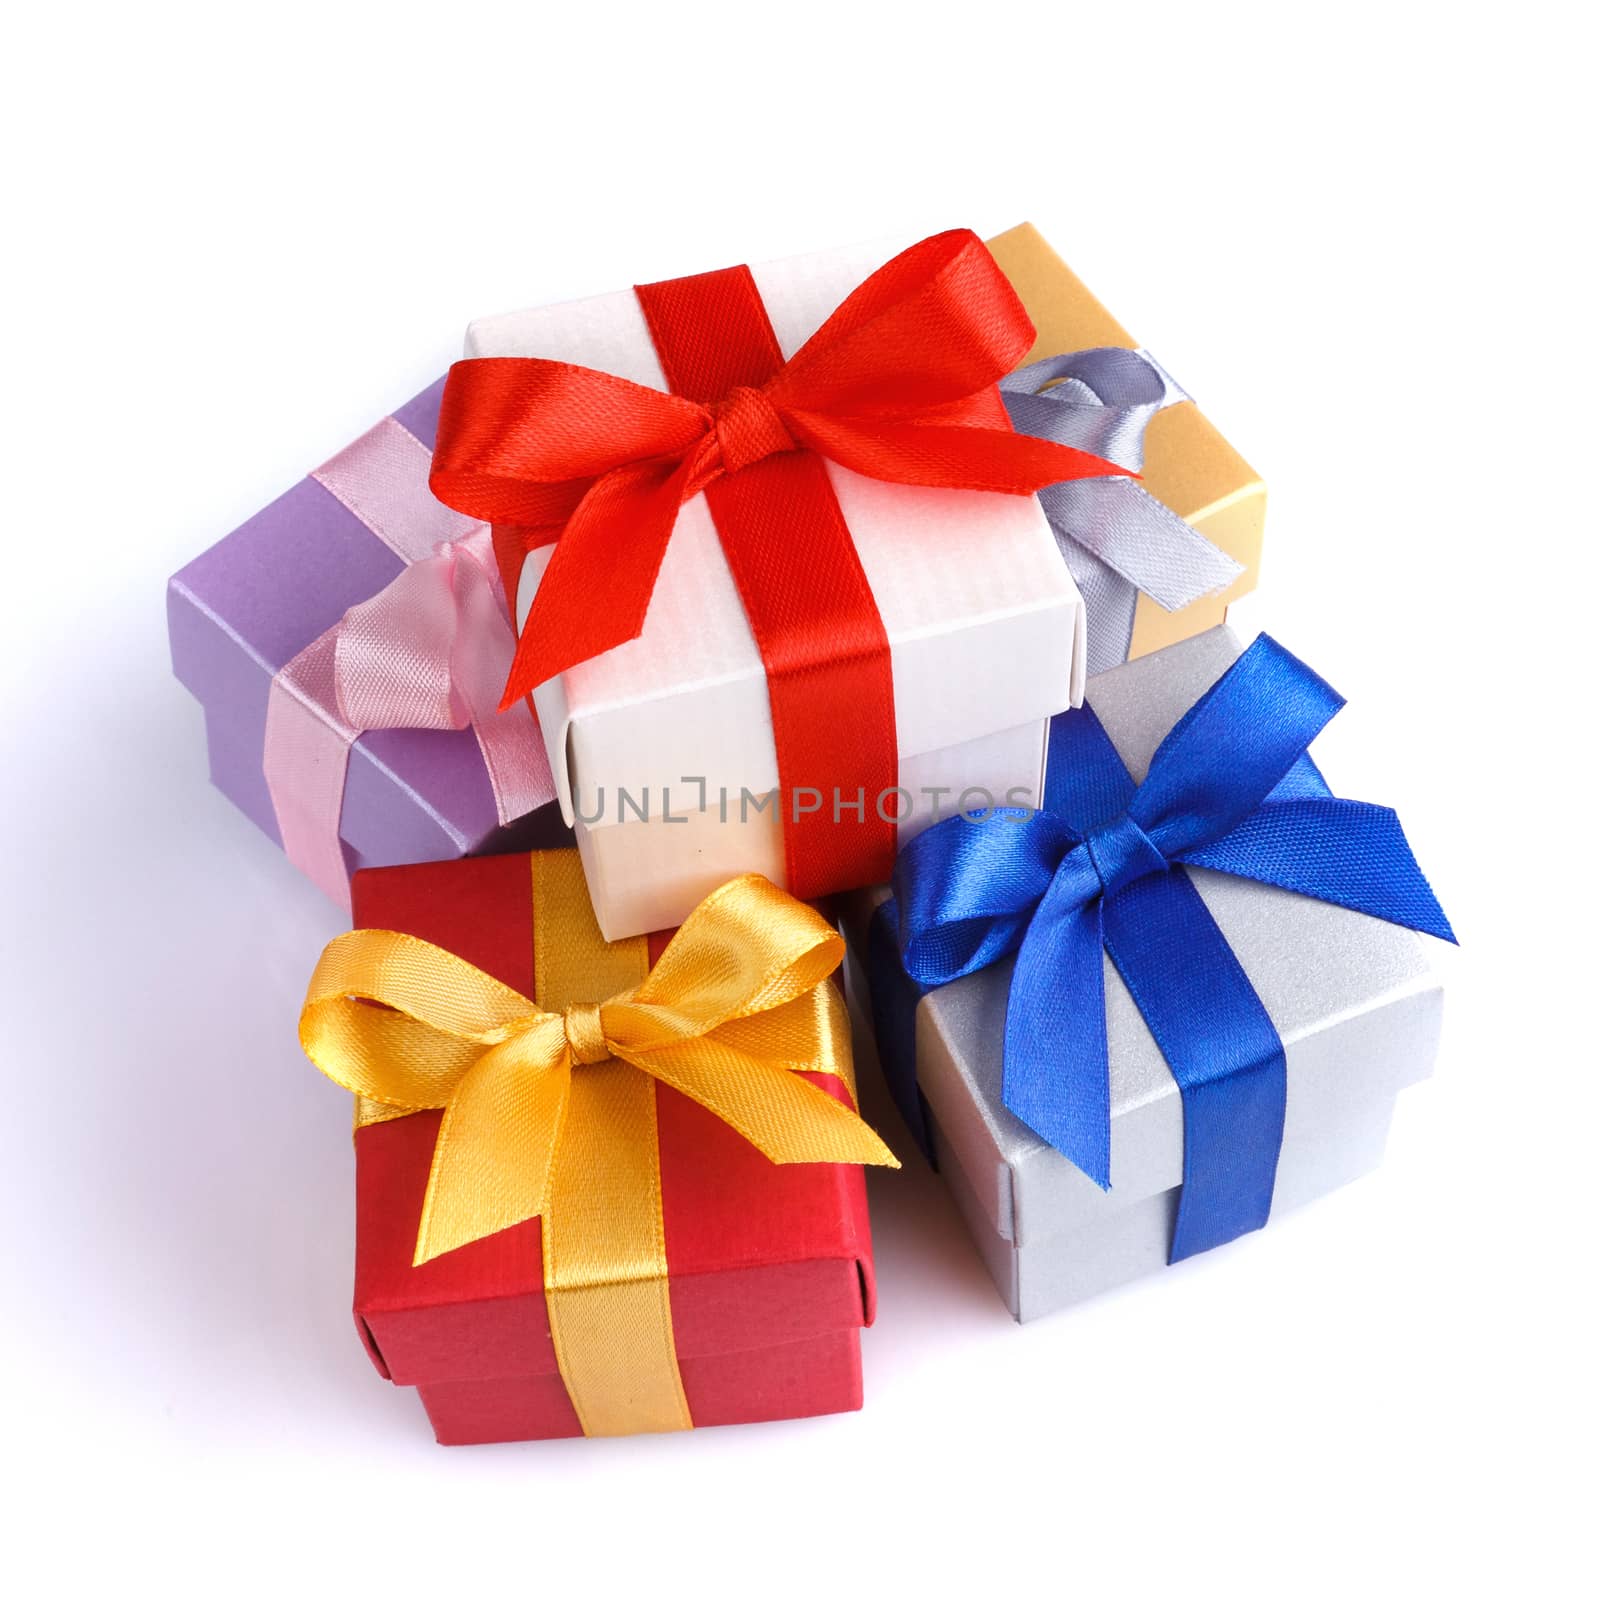 Colourful gift boxes on a white background top view